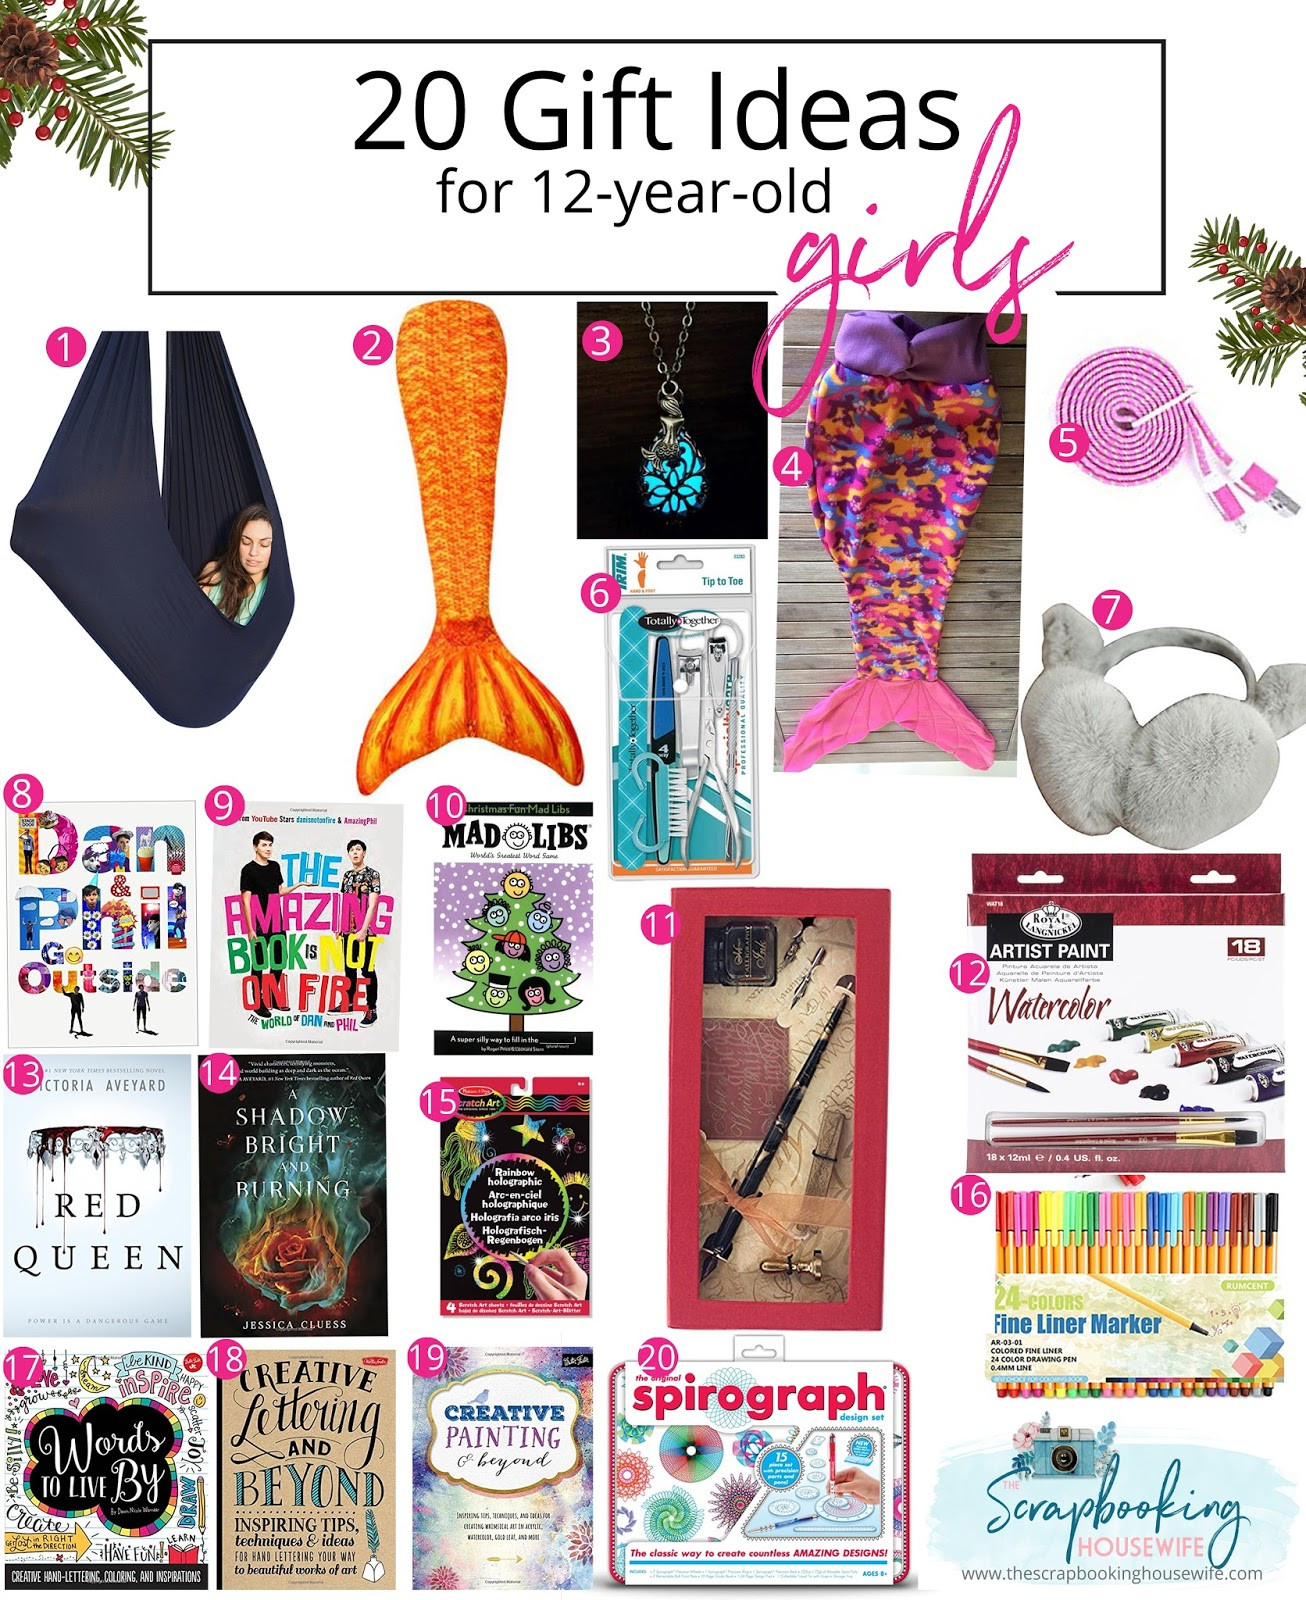 Christmas Gift Ideas For 12 Year Old Daughter
 Ellabella Designs 13 GIFT IDEAS FOR TODDLERS